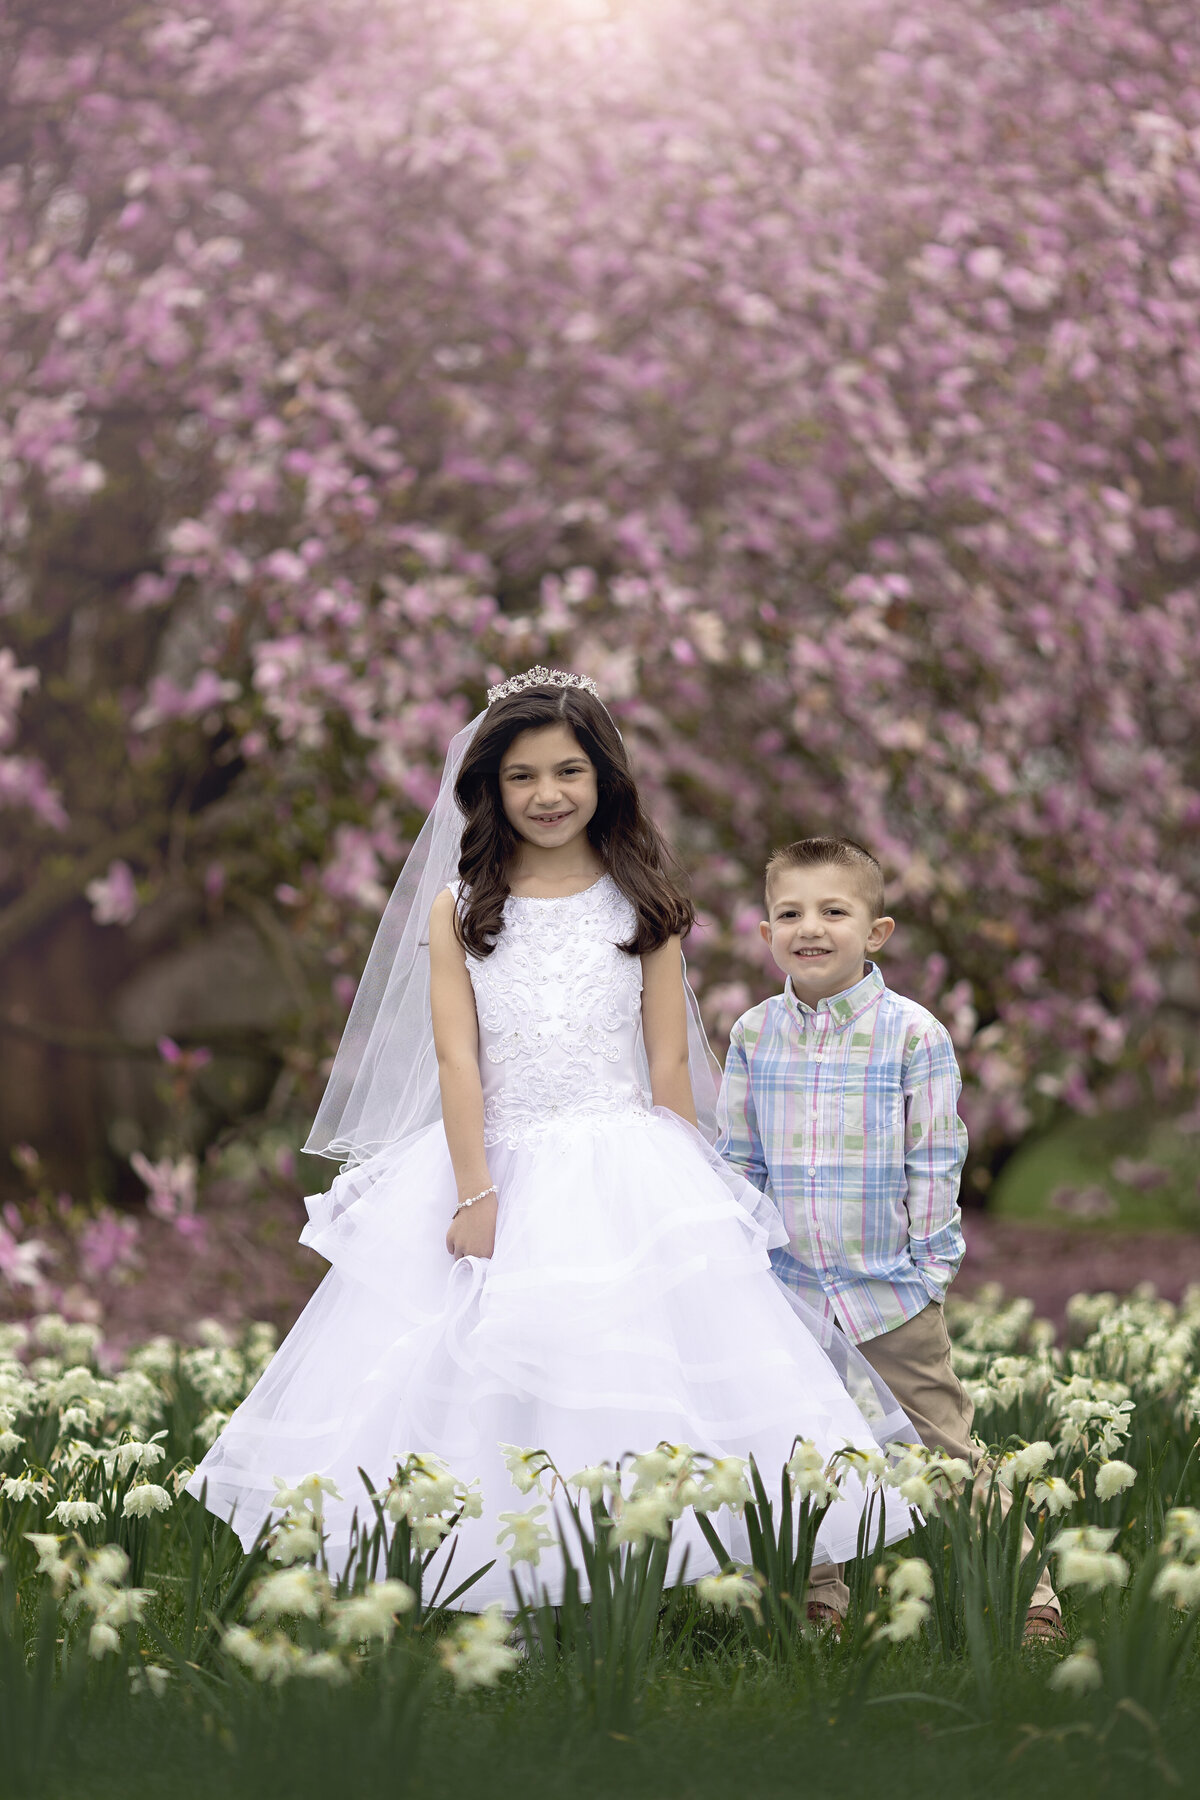 A young girl in a white dress stands with her little brother in a field of daffodils with her toddler brother